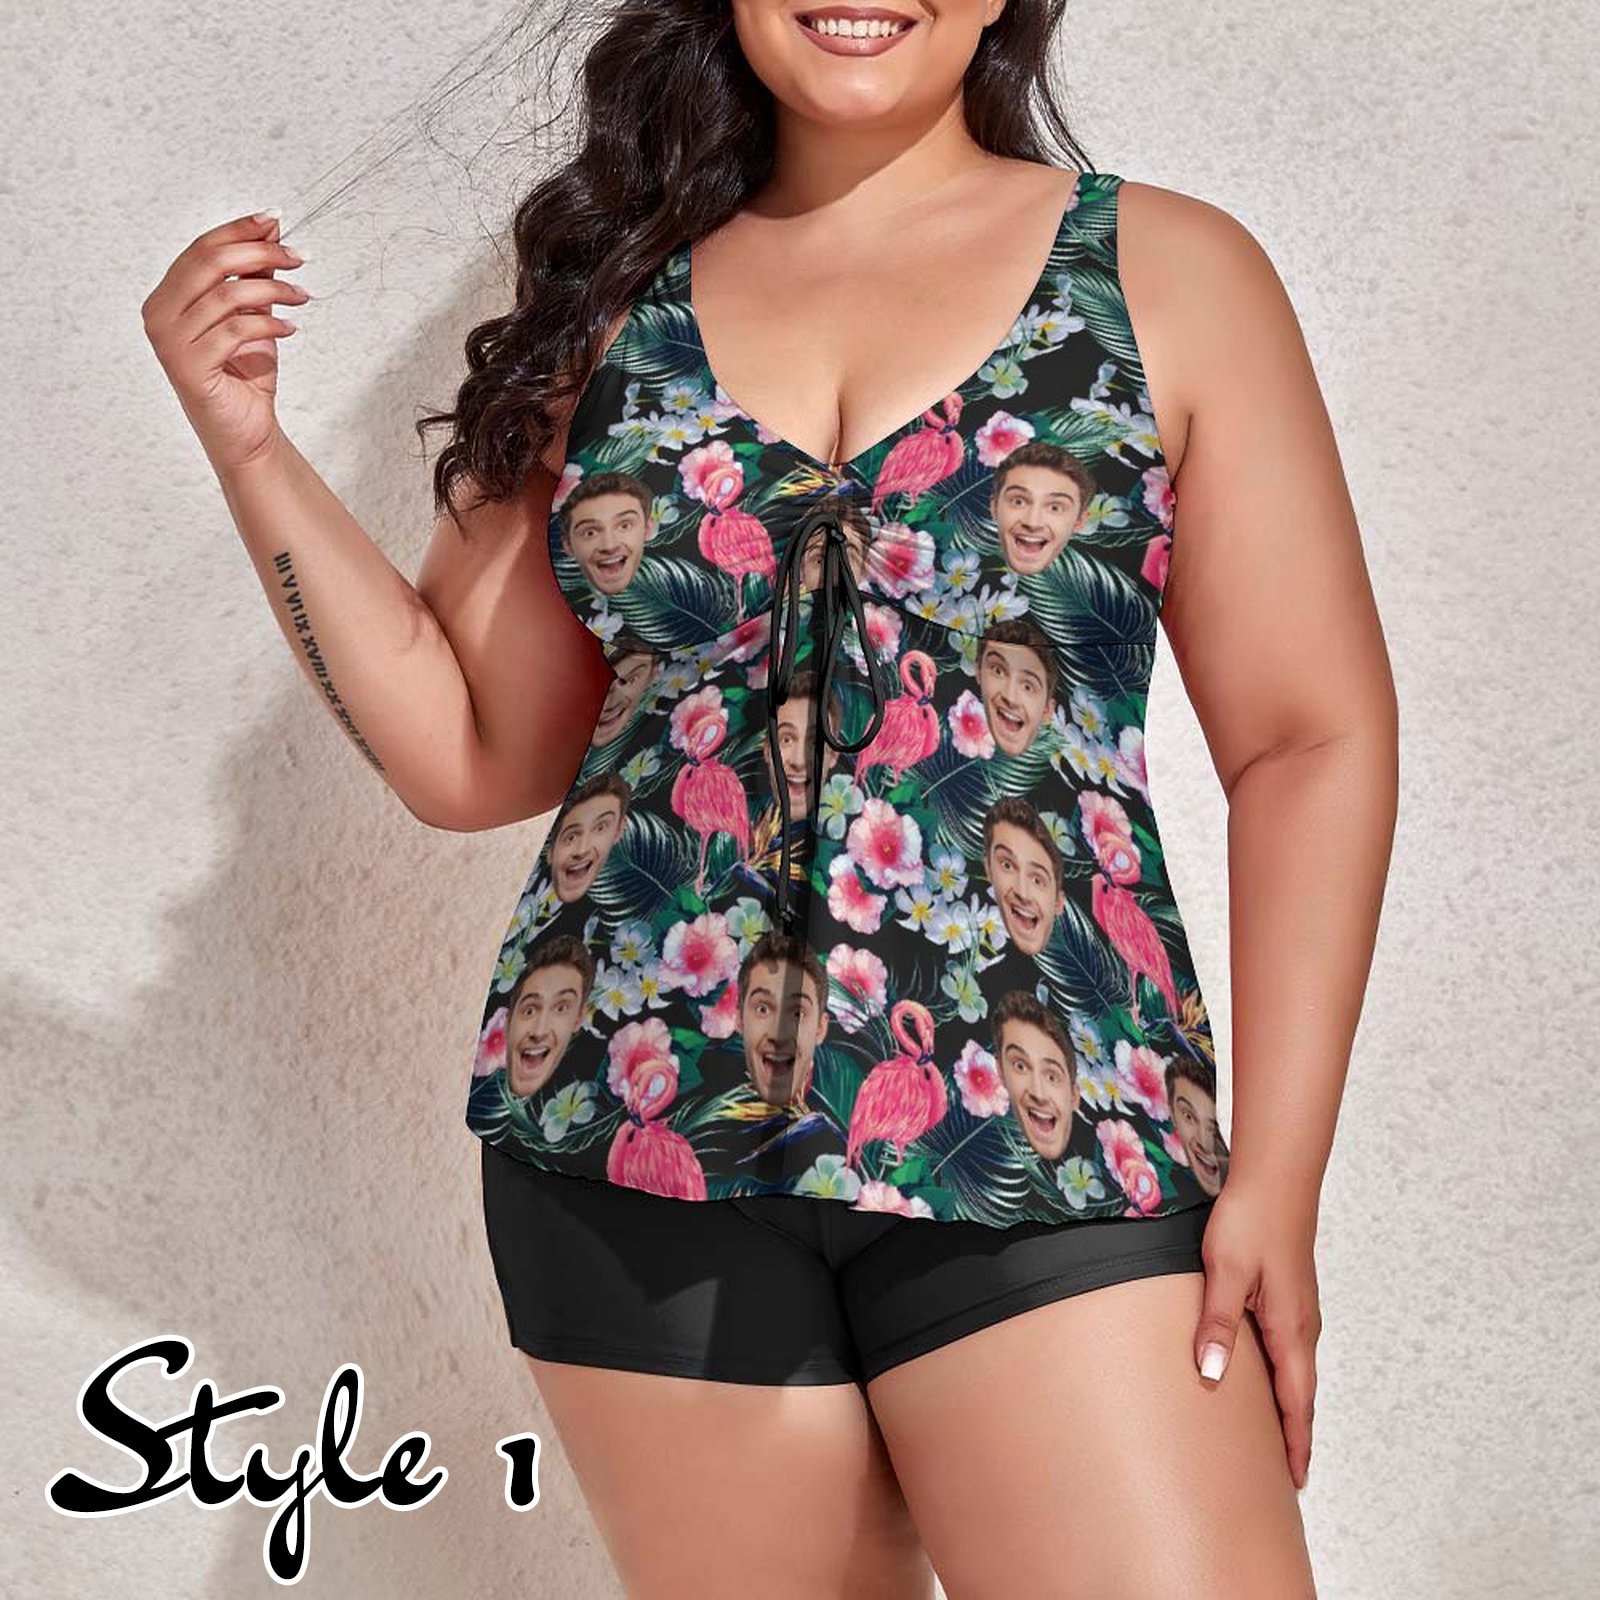 Plus Size Tankini Tops With Built In Bra